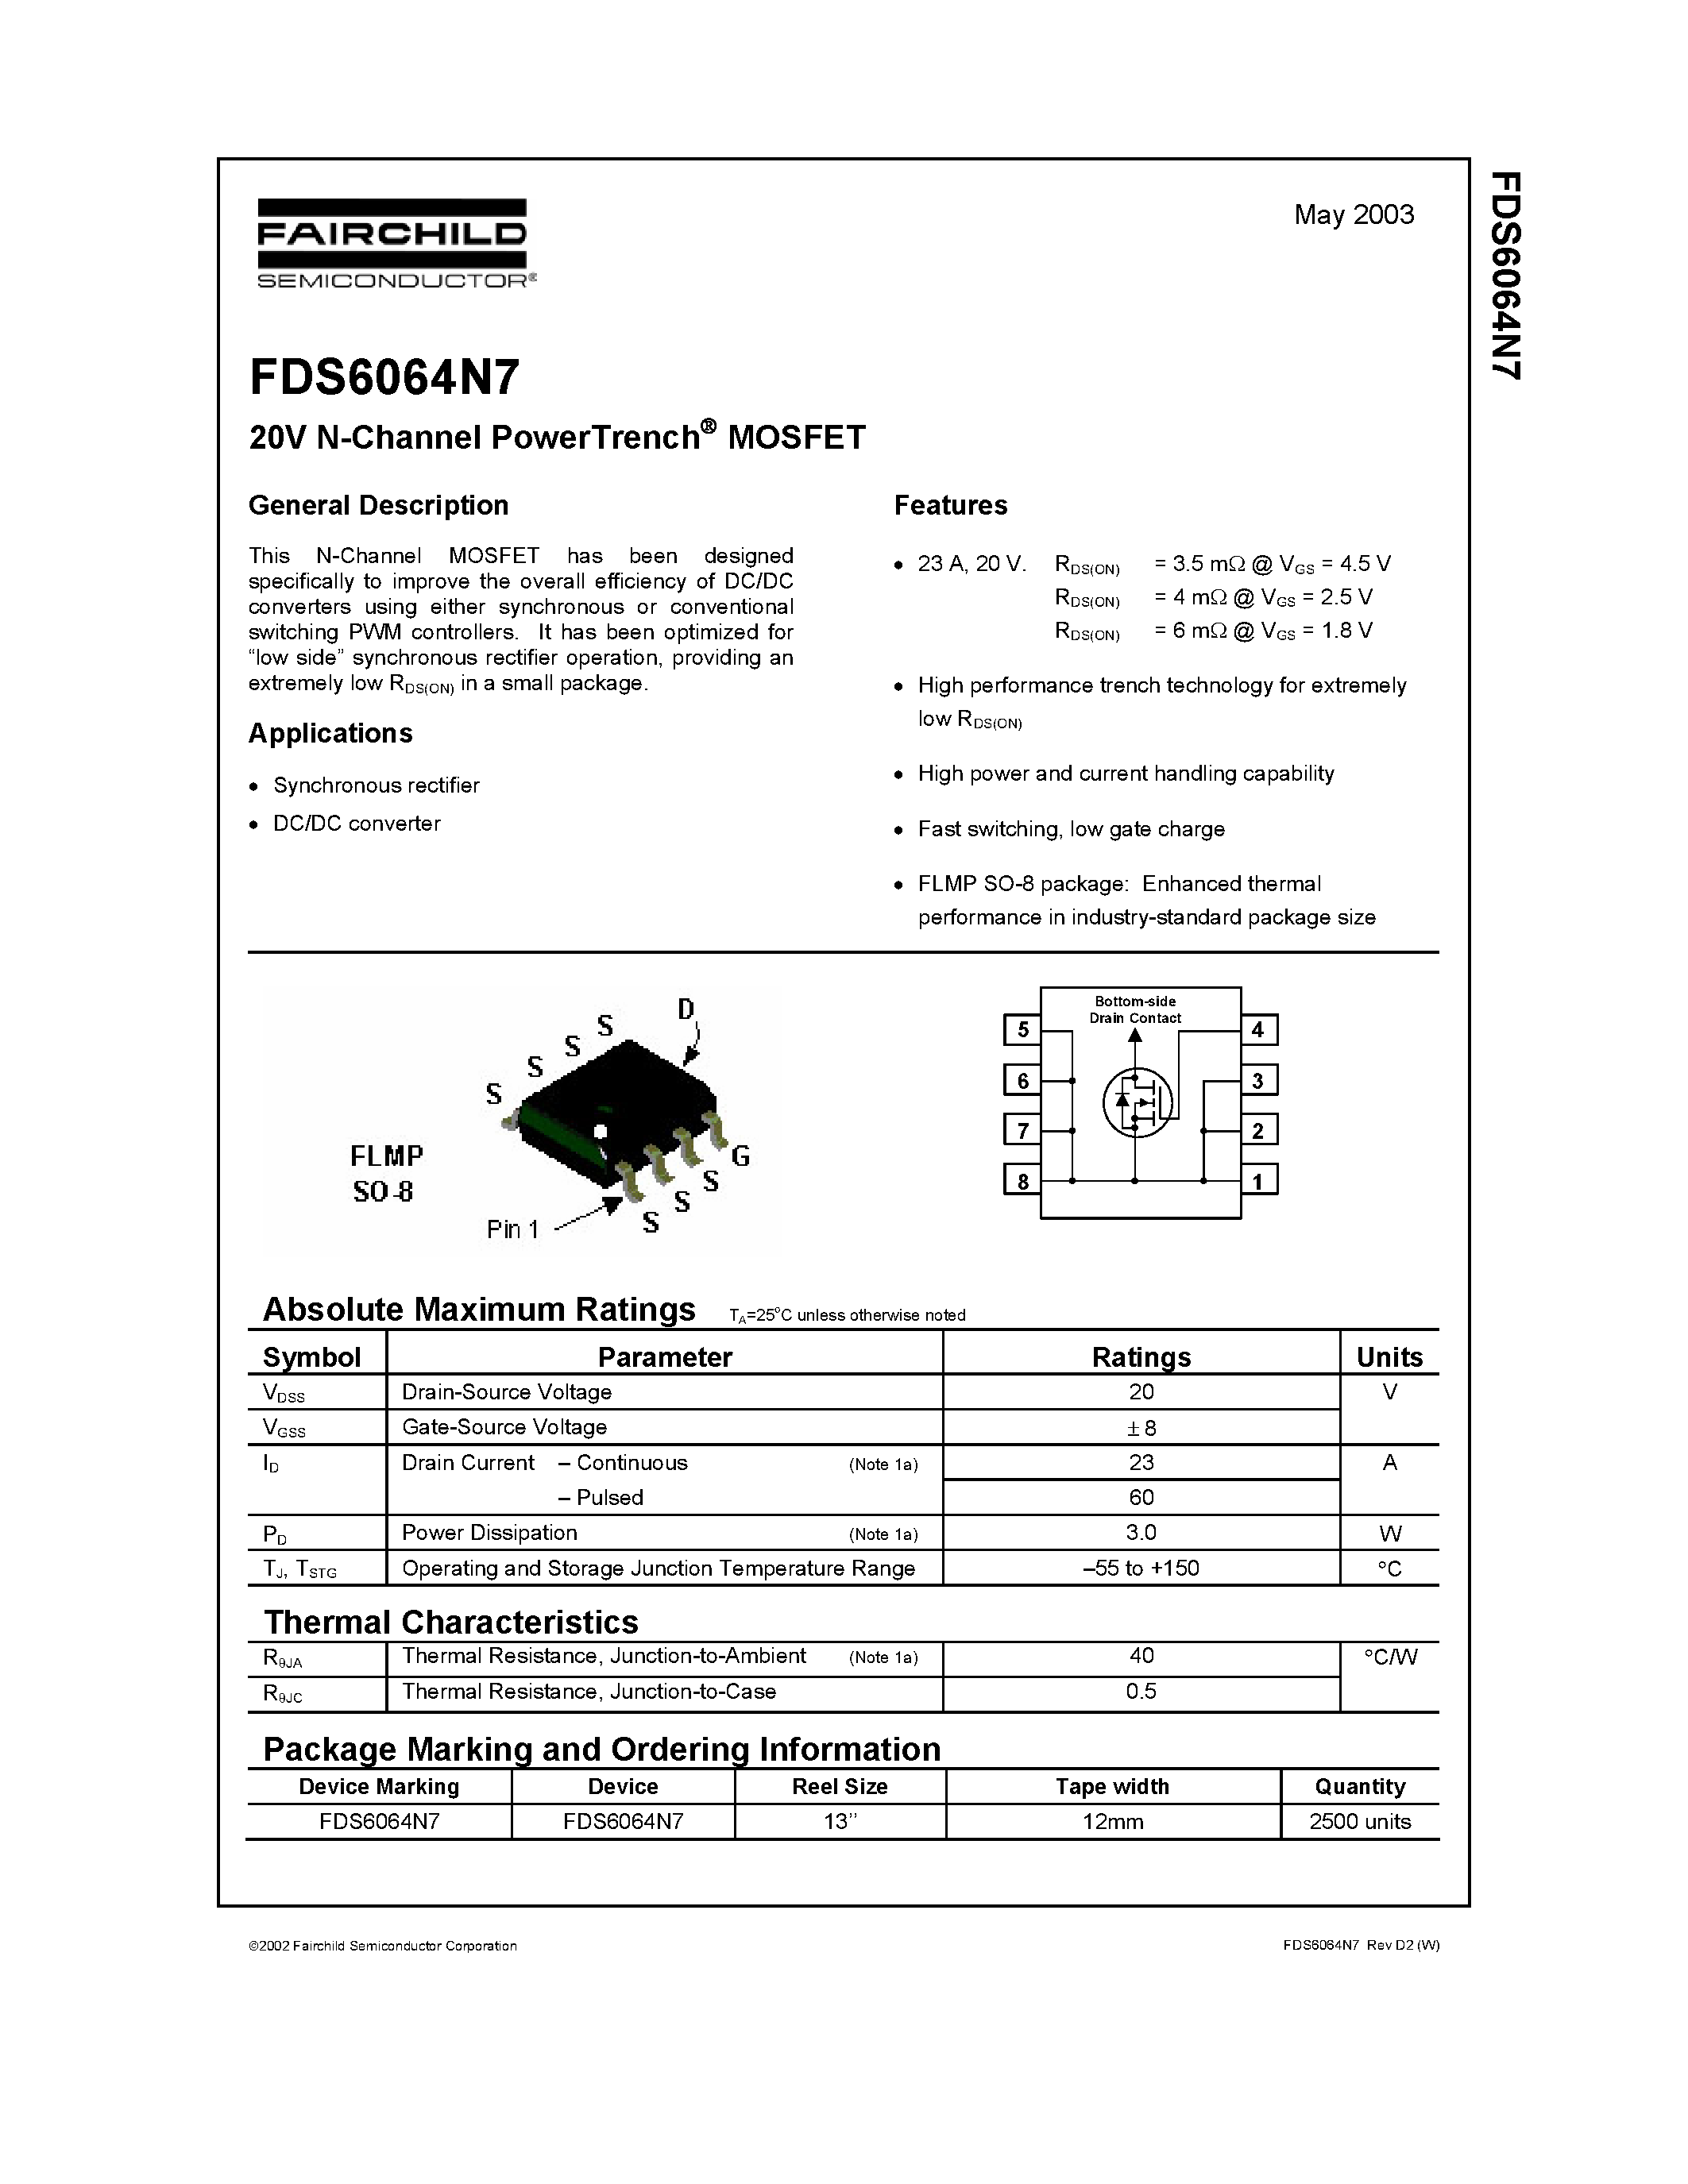 Даташит FDS6064N7 - 20V N-Channel PowerTrench MOSFET страница 1